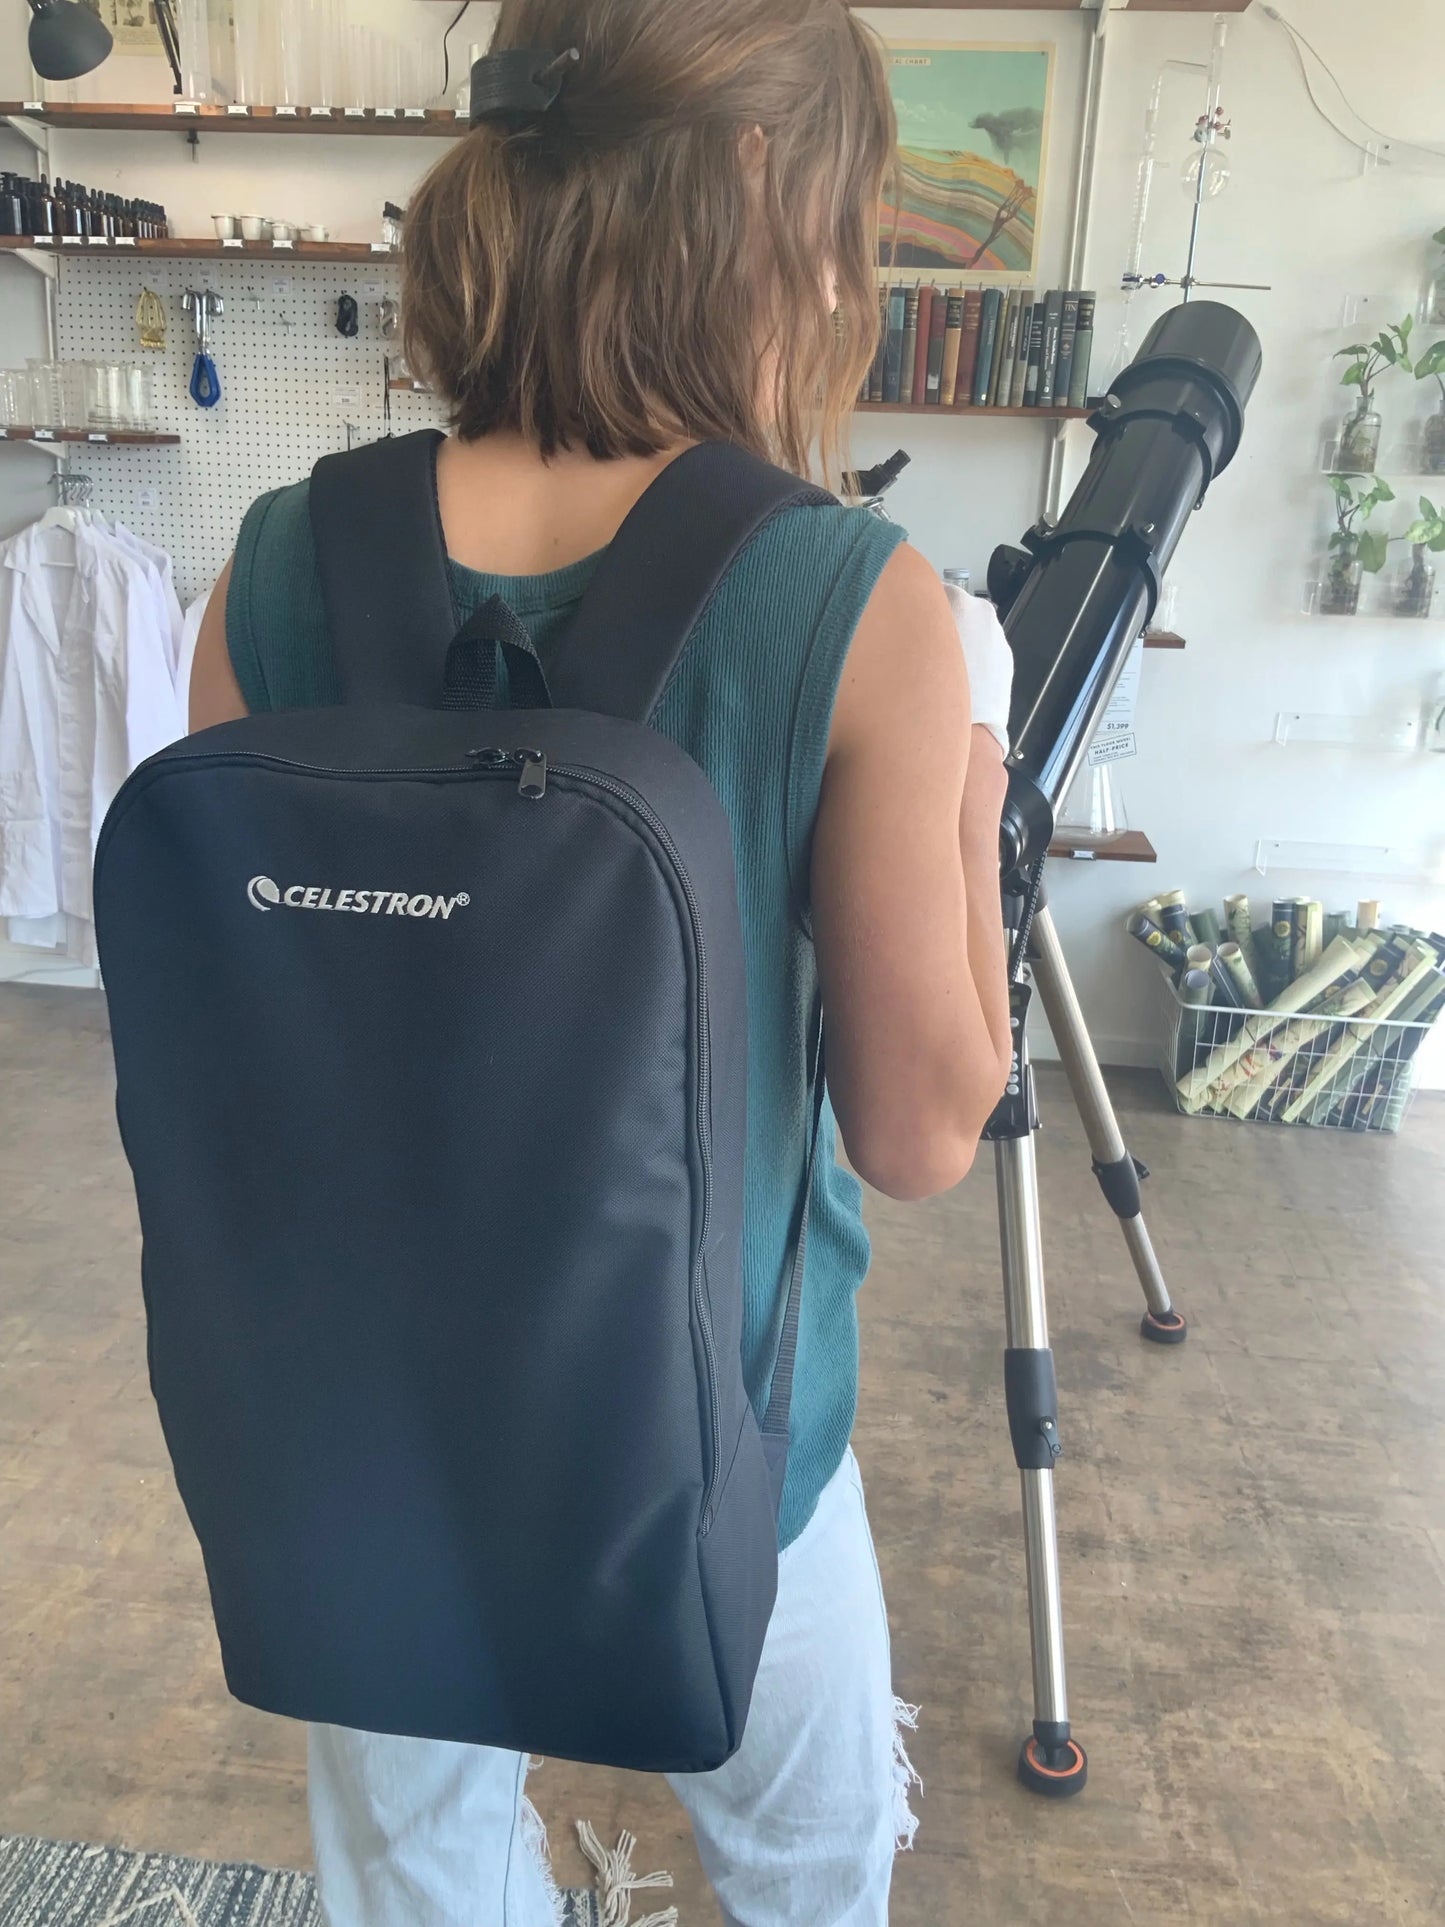 Travel Scope 50 w/ Backpack - Stemcell Science Shop